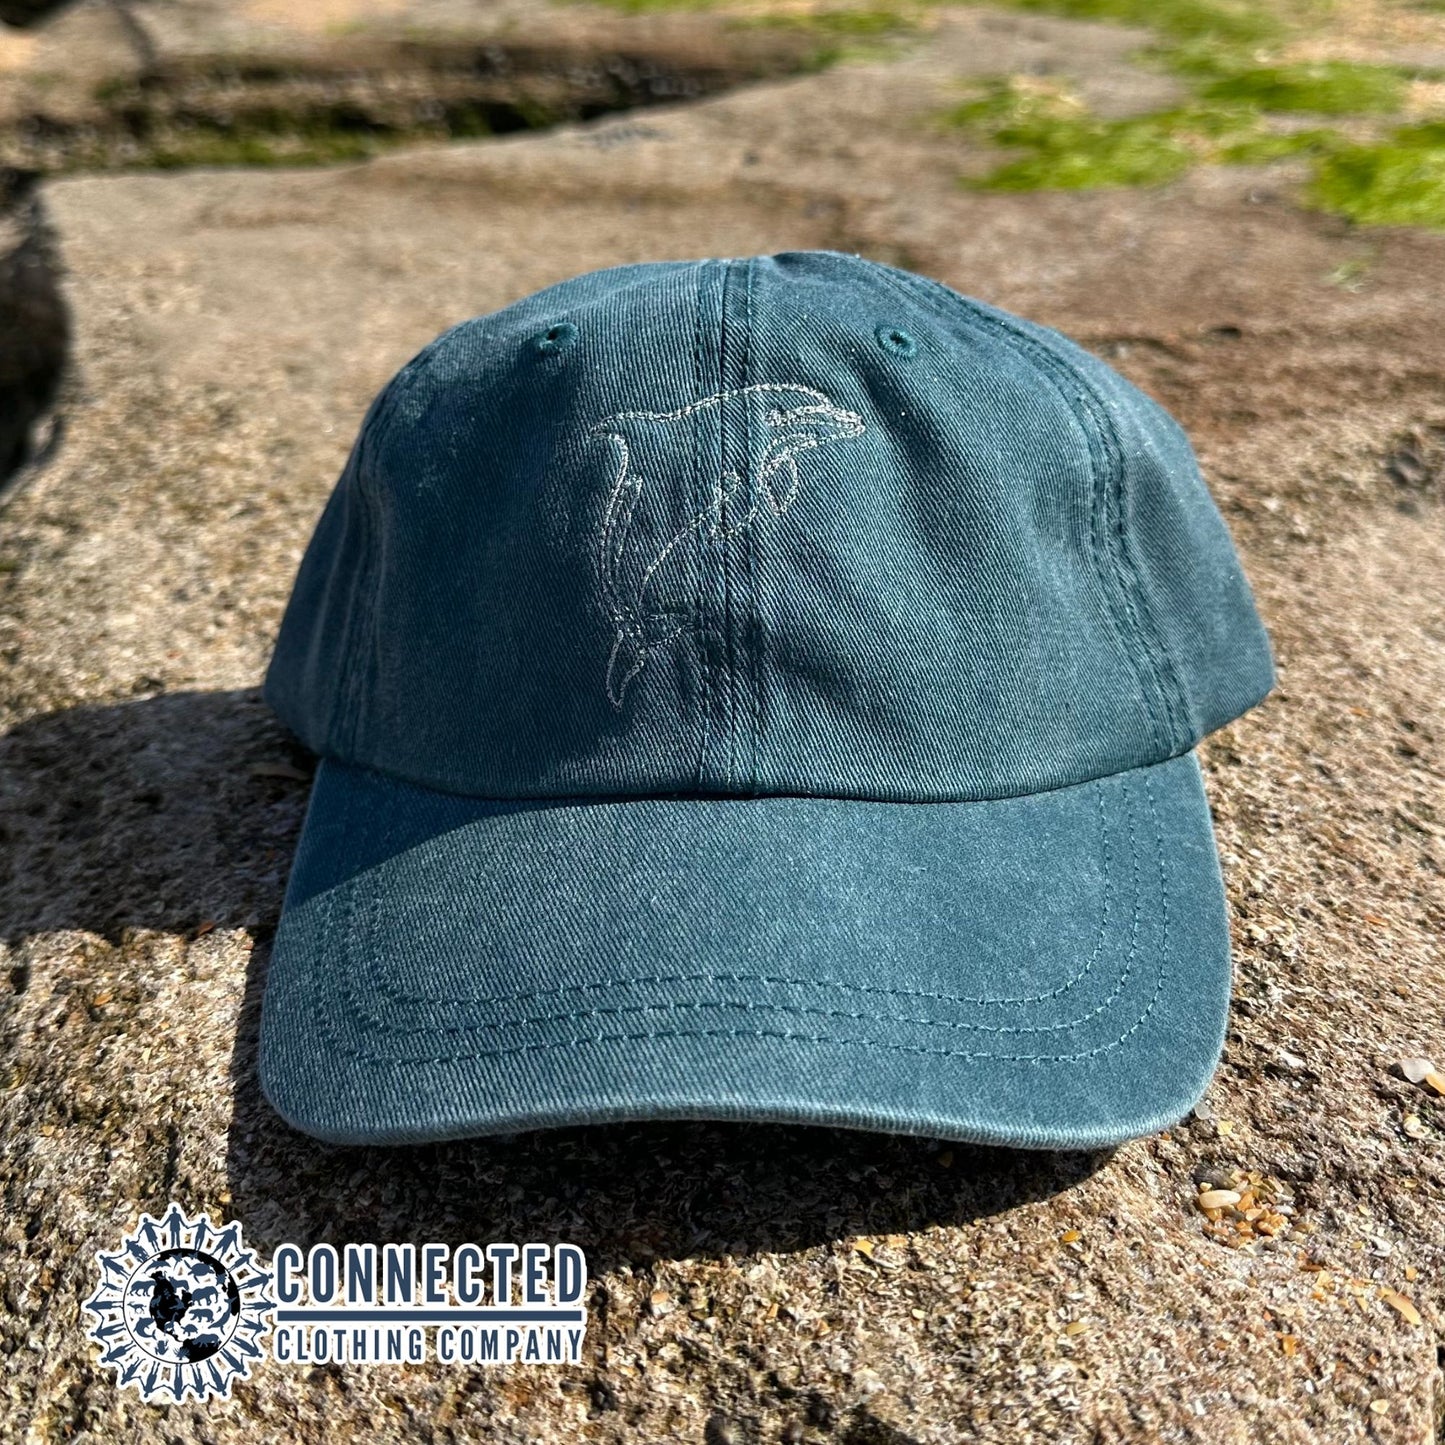 dolphin embroidered hat - connected clothing company - 10% donated to ocean conservation